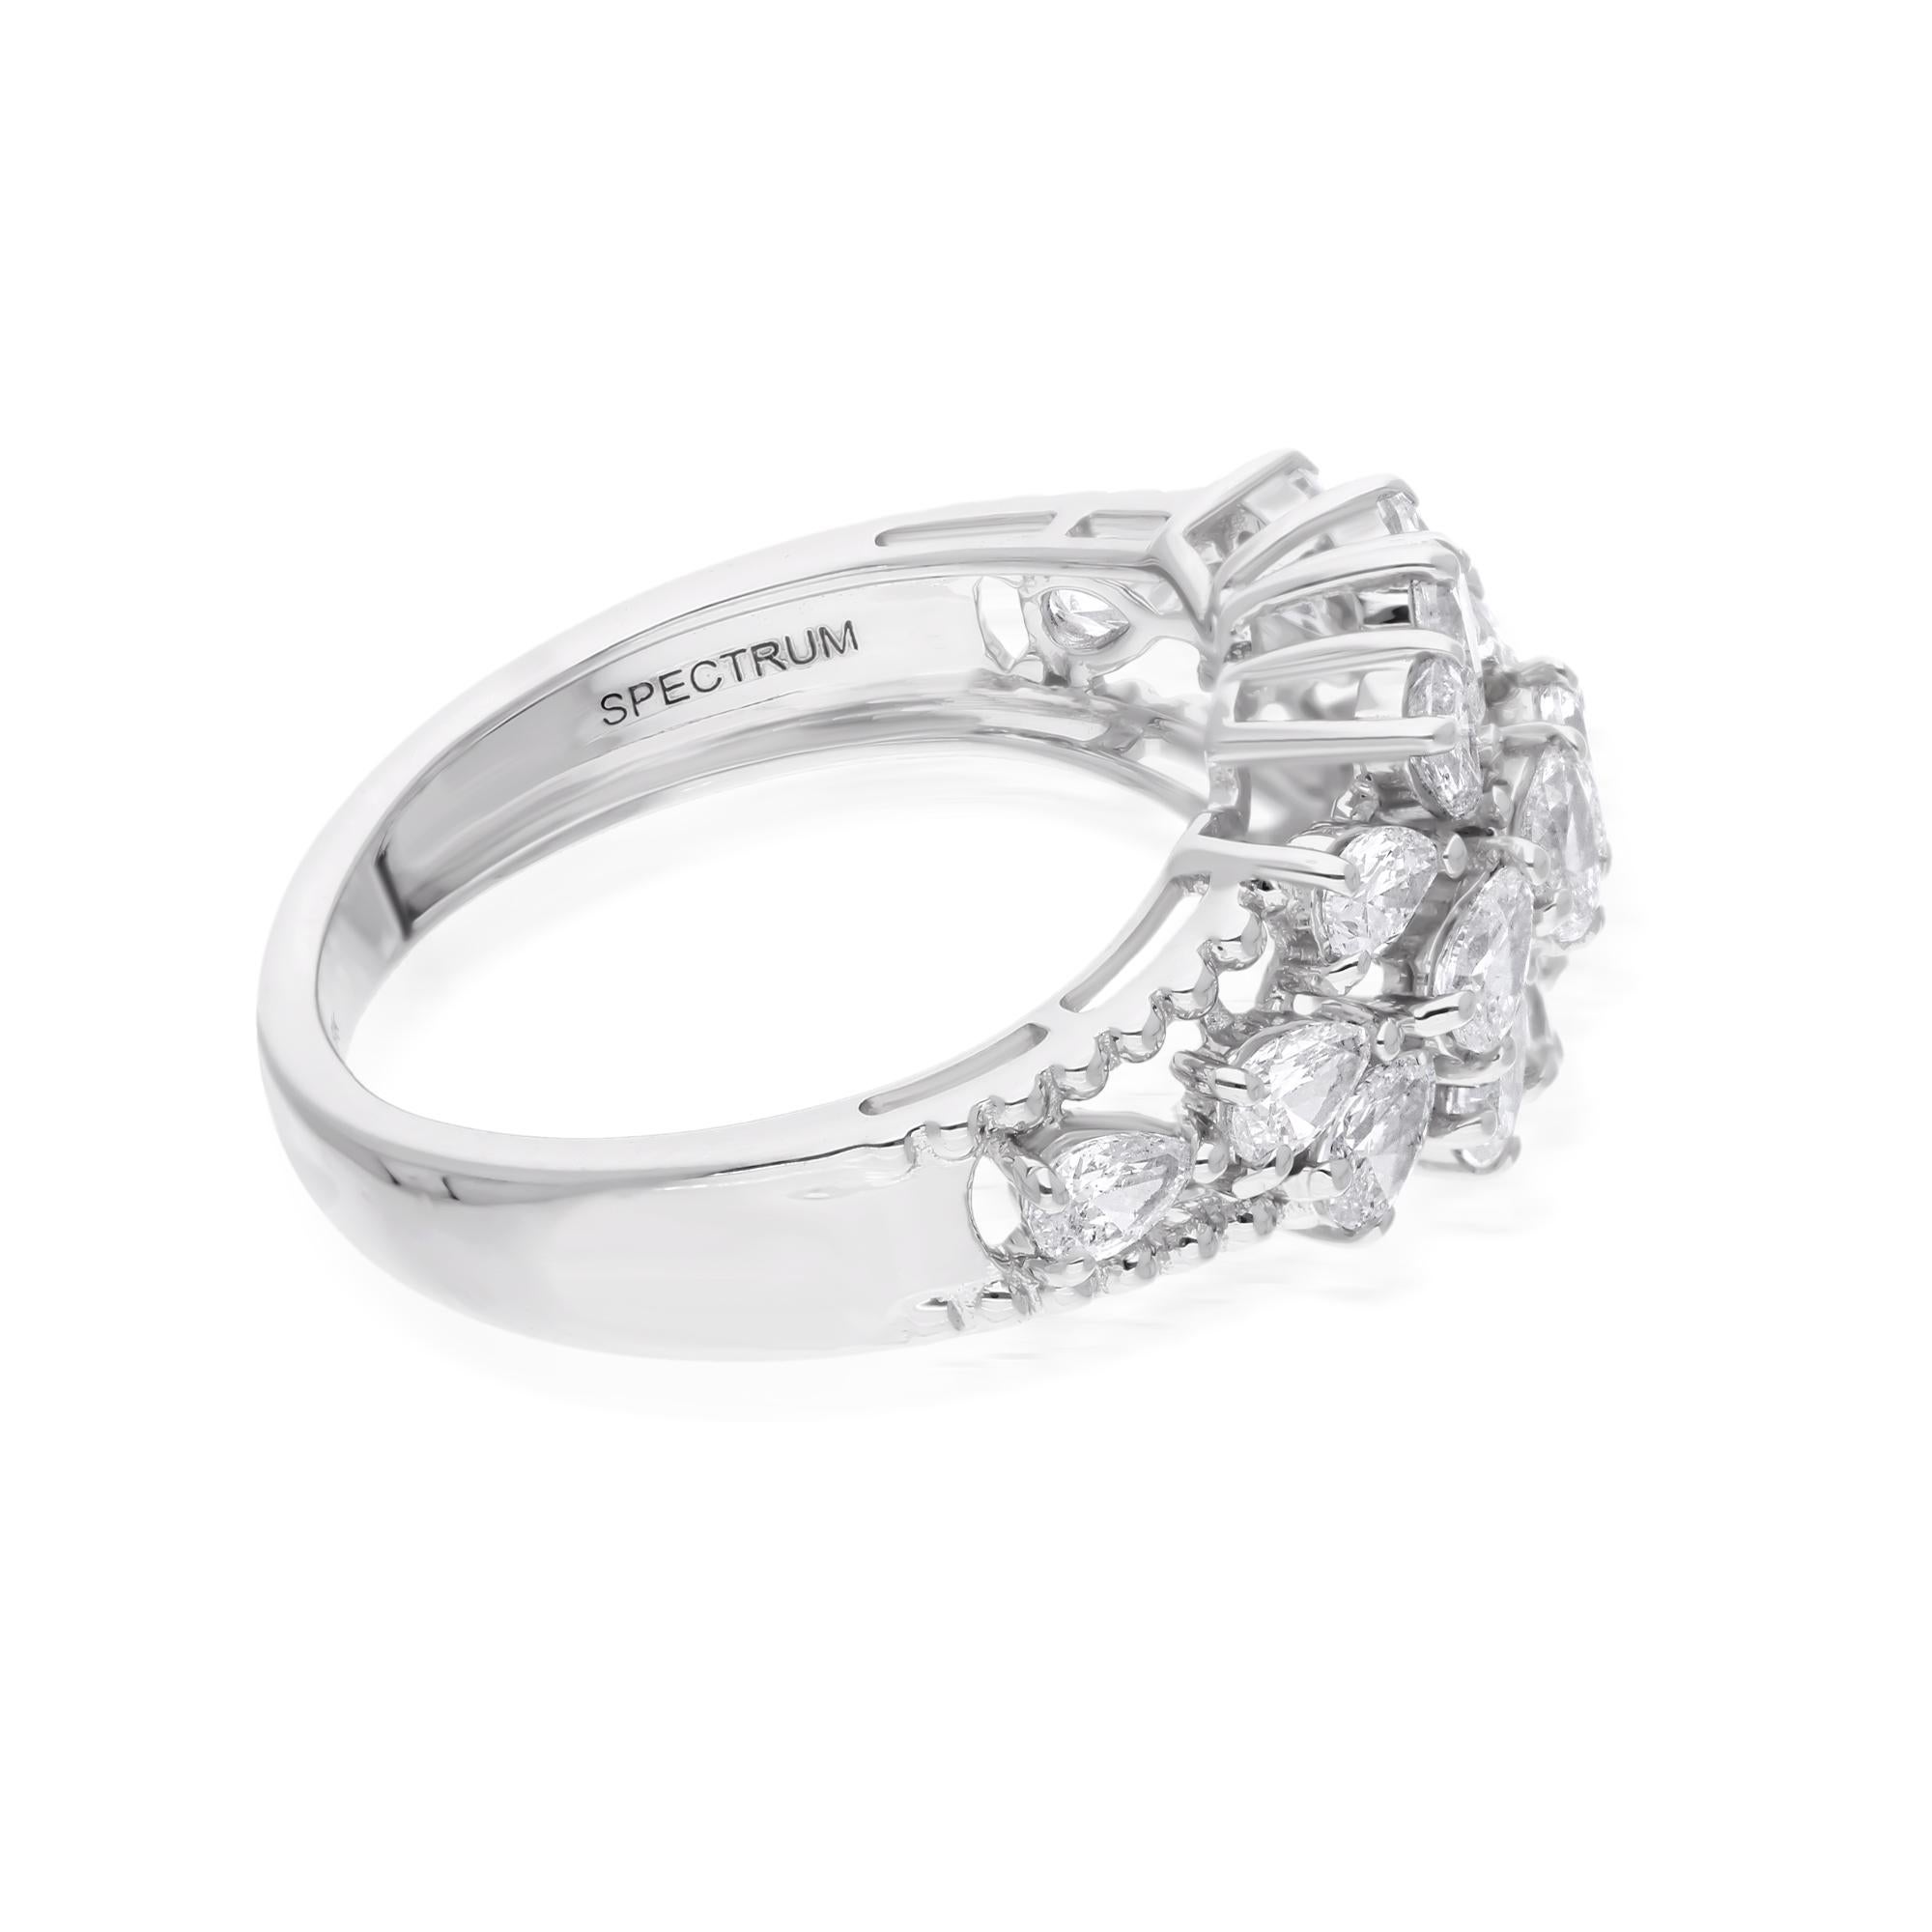 Surrounding the central diamond are meticulously placed smaller diamonds, adding depth and dimension to the design. Each diamond is expertly set to enhance the overall radiance and beauty of the ring, creating a breathtaking display of luxury and